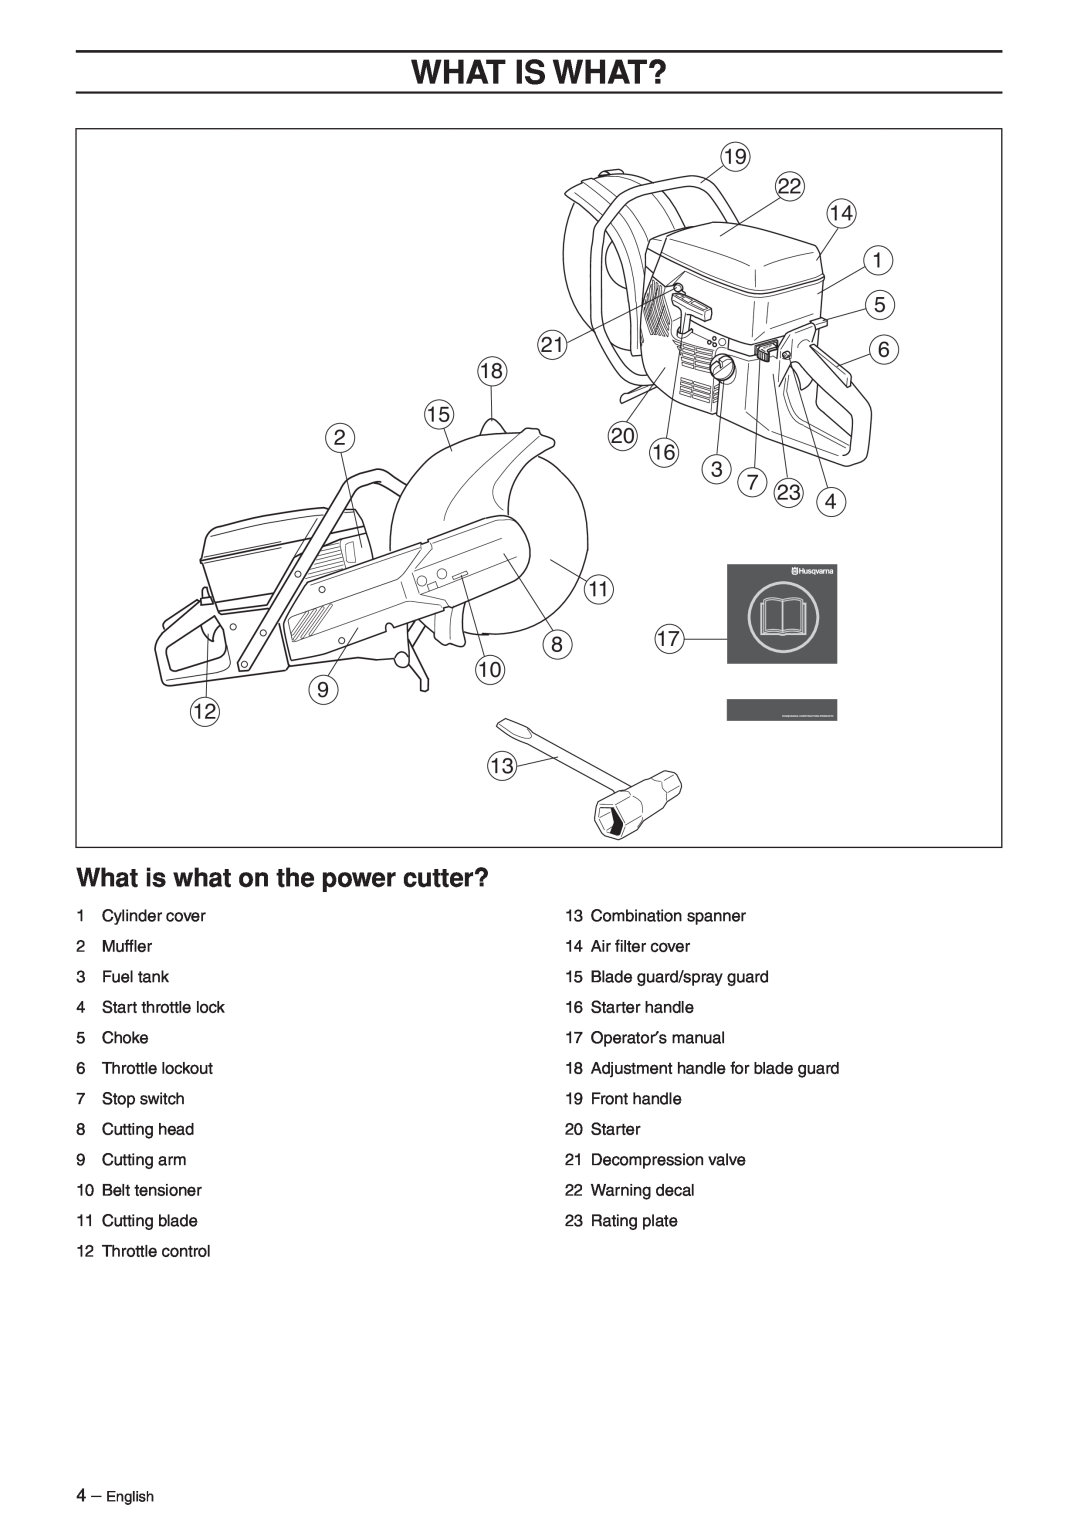 Husqvarna K950 manual What Is What?, What is what on the power cutter? 